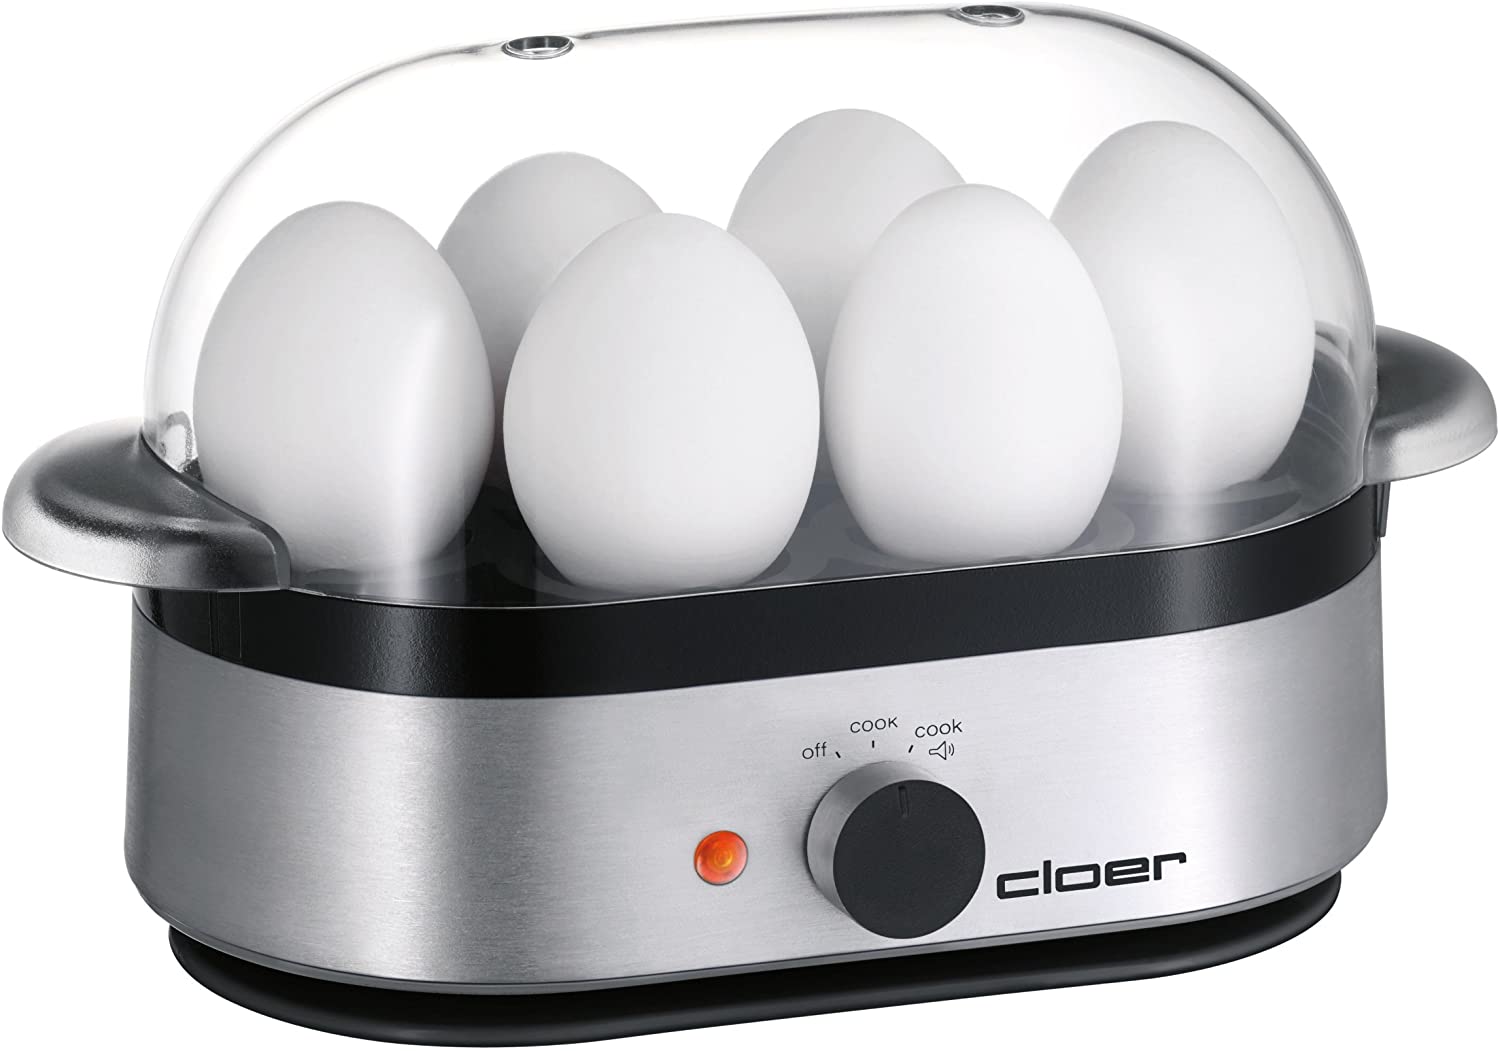 Cloer 6099 - egg cookers